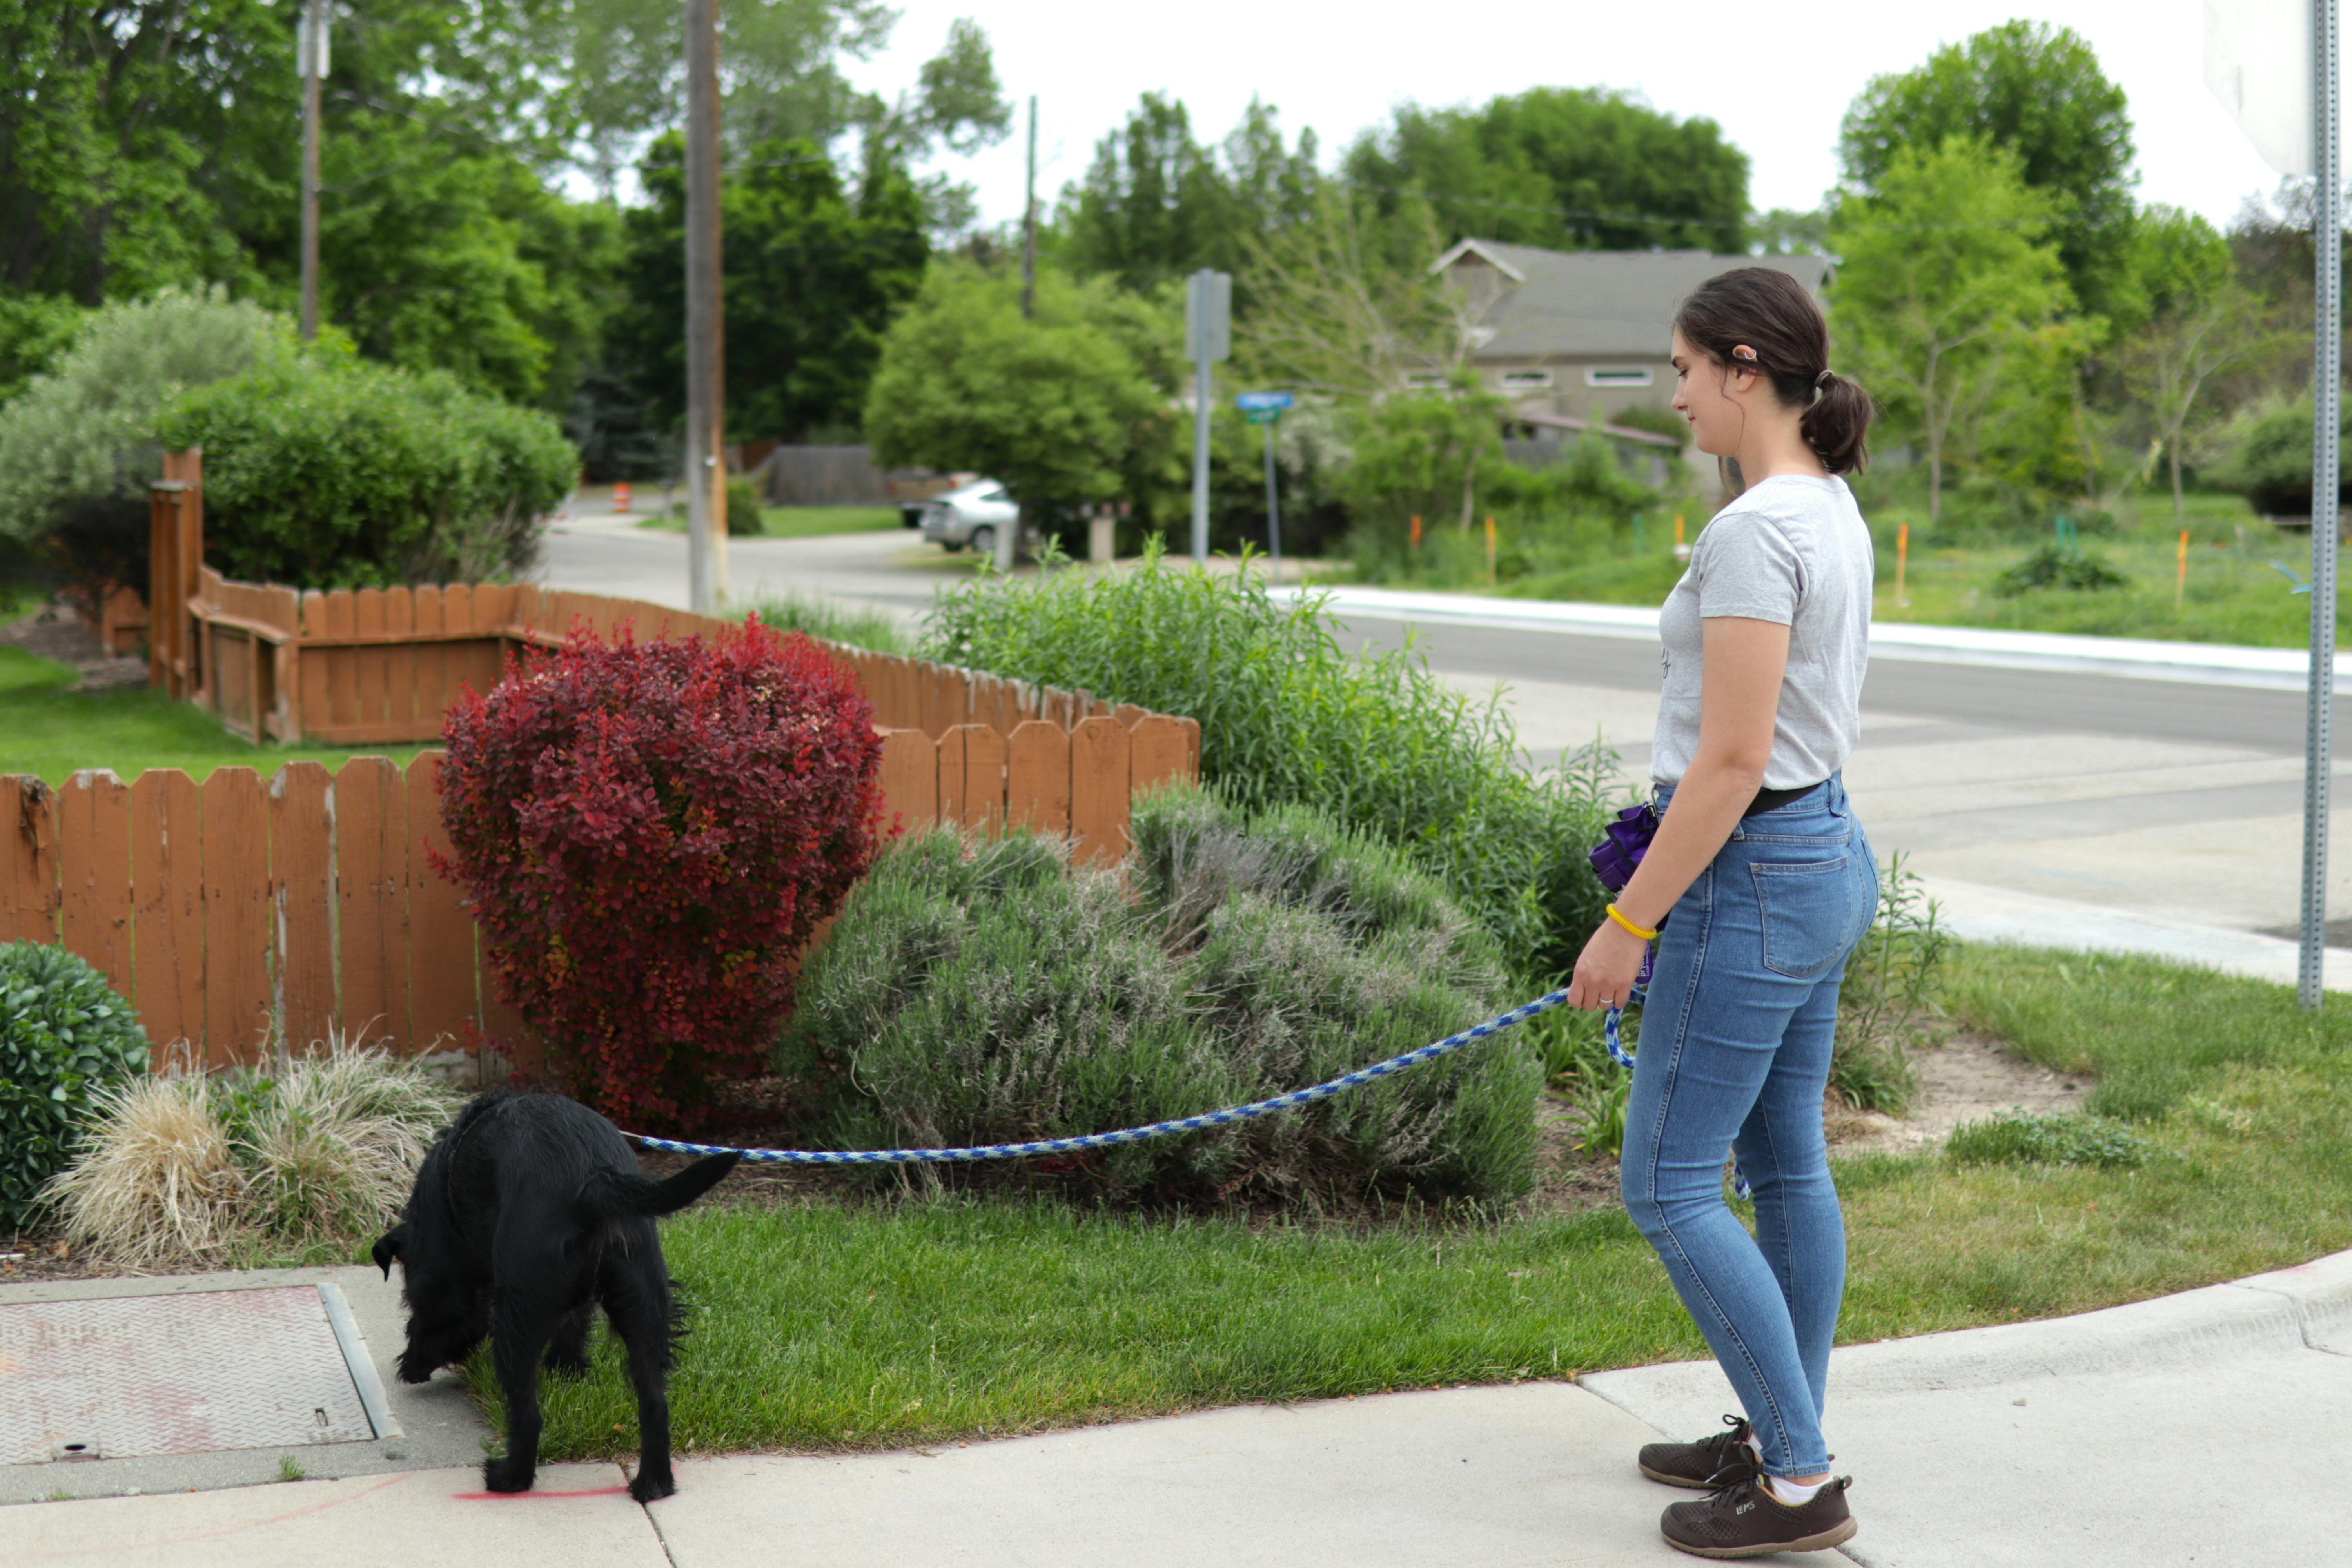 Black dog sniffs the grass while on walk with a woman